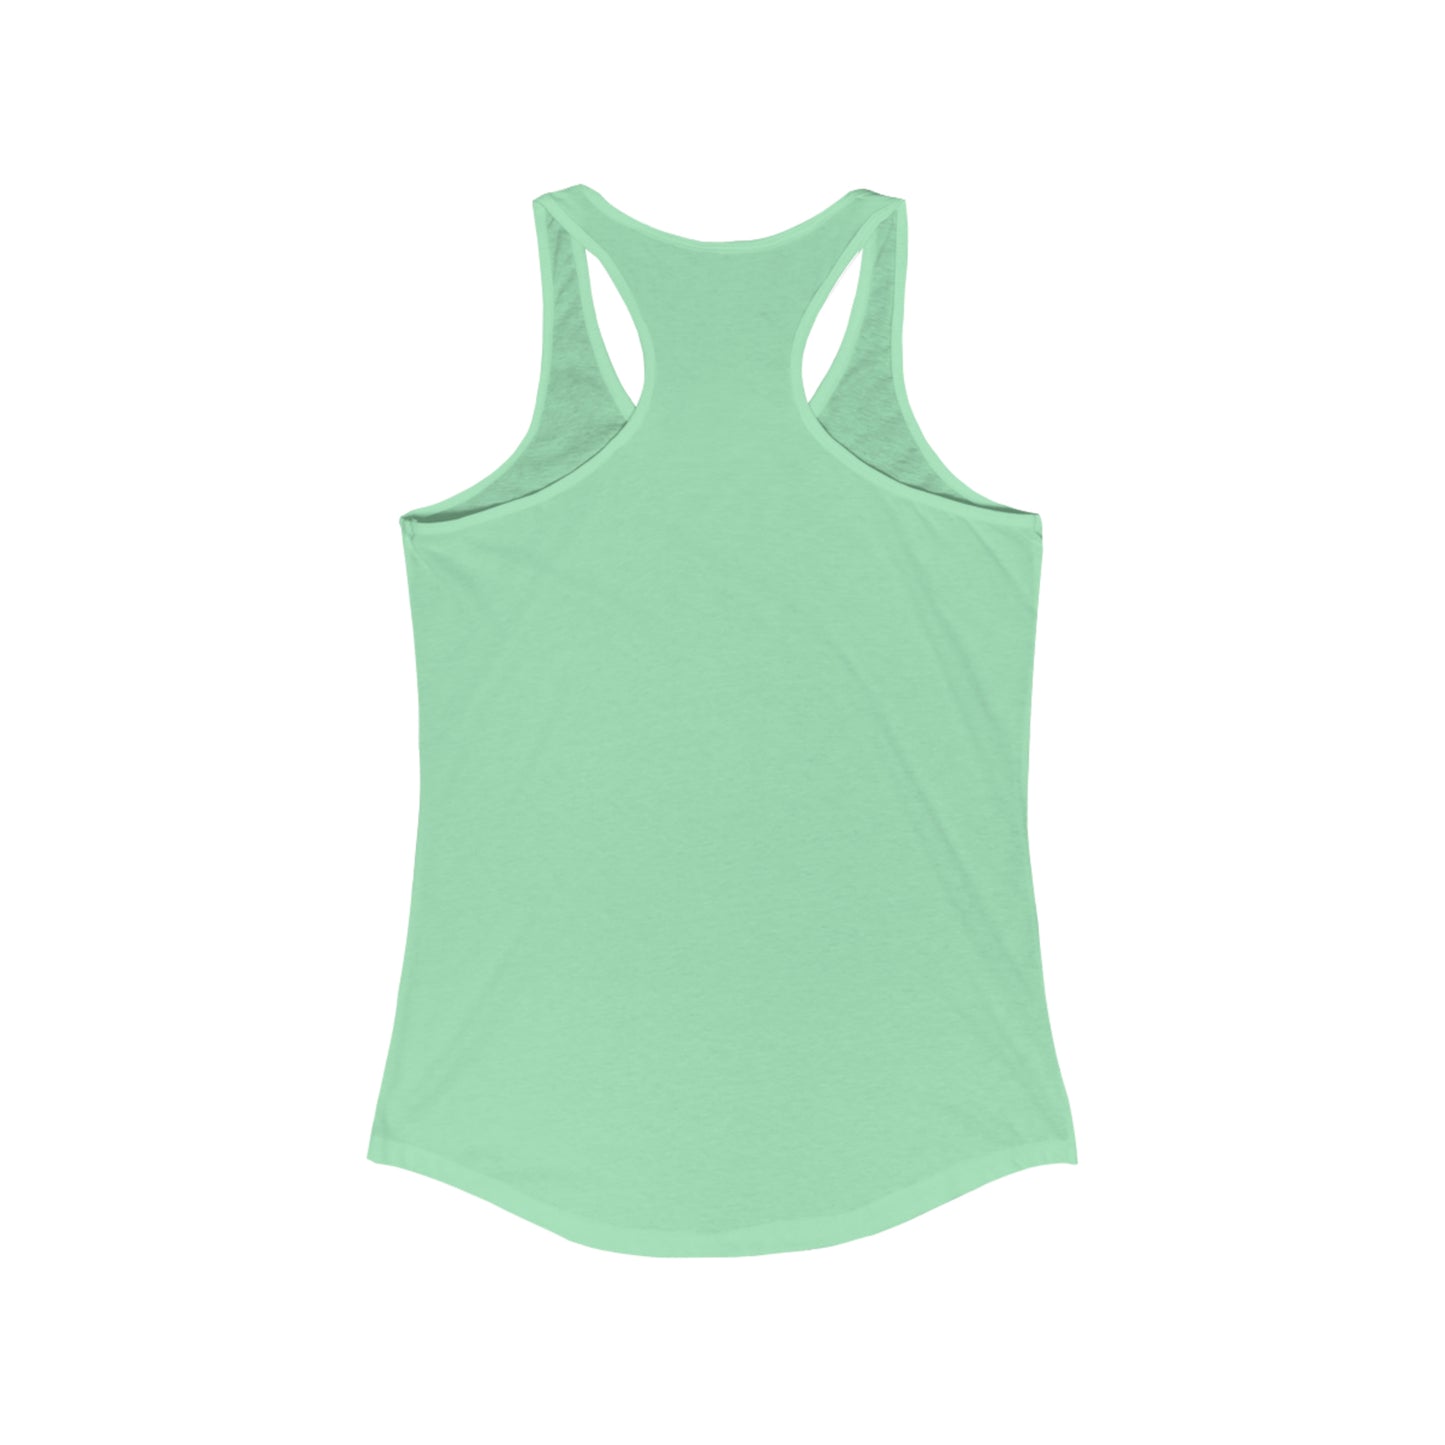 Women's Racerback Tank | CRFC Wolfhounds White Crest